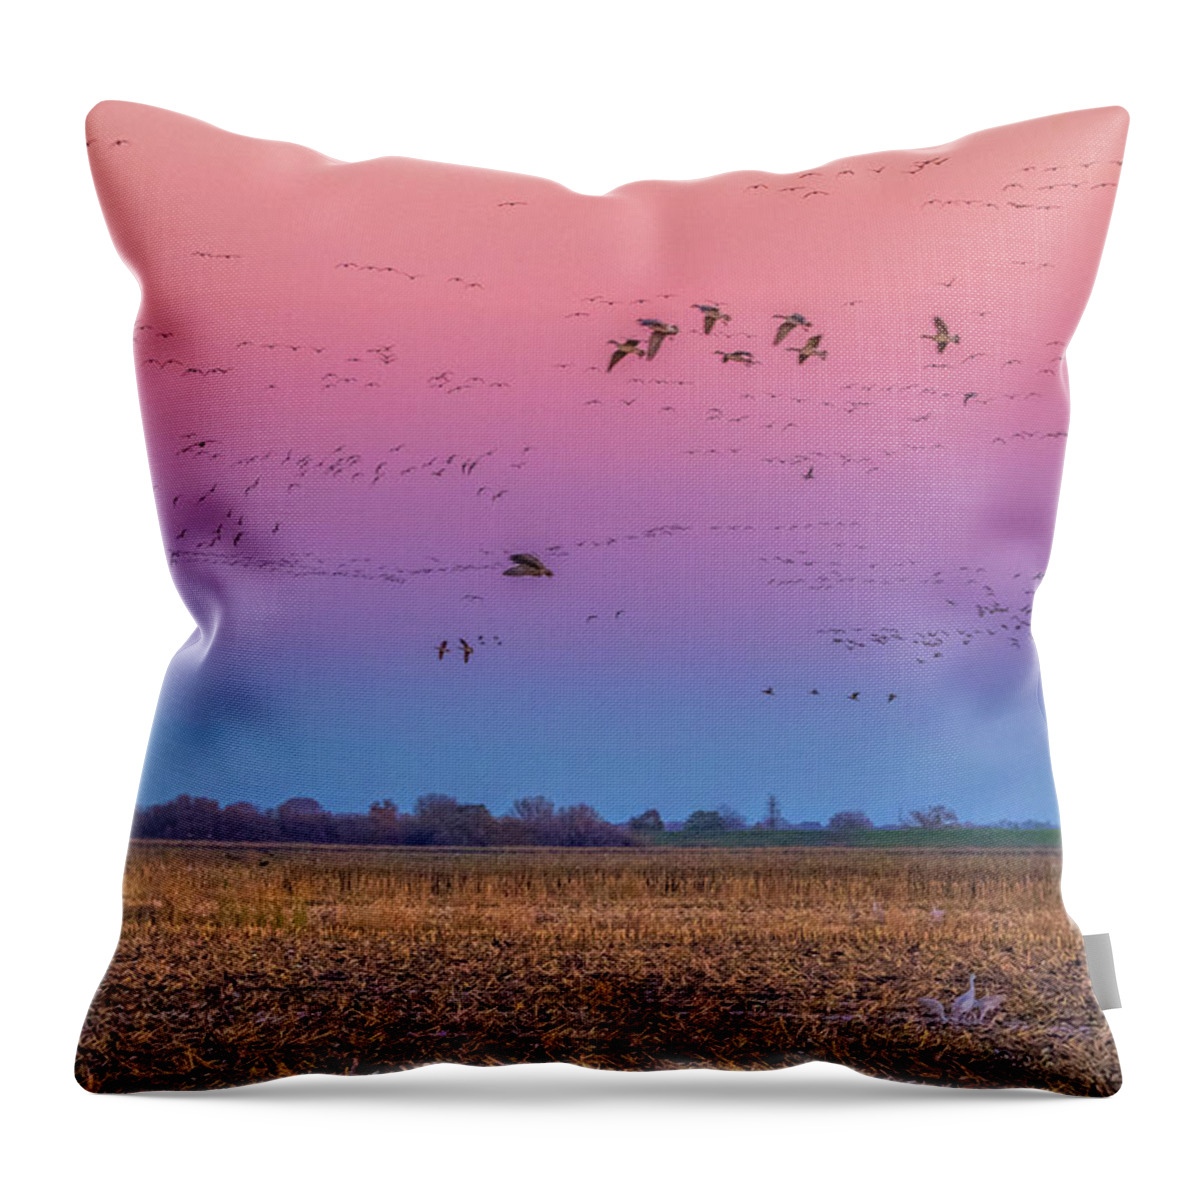 Landscape Throw Pillow featuring the photograph Geese Flying at Sunset by Marc Crumpler